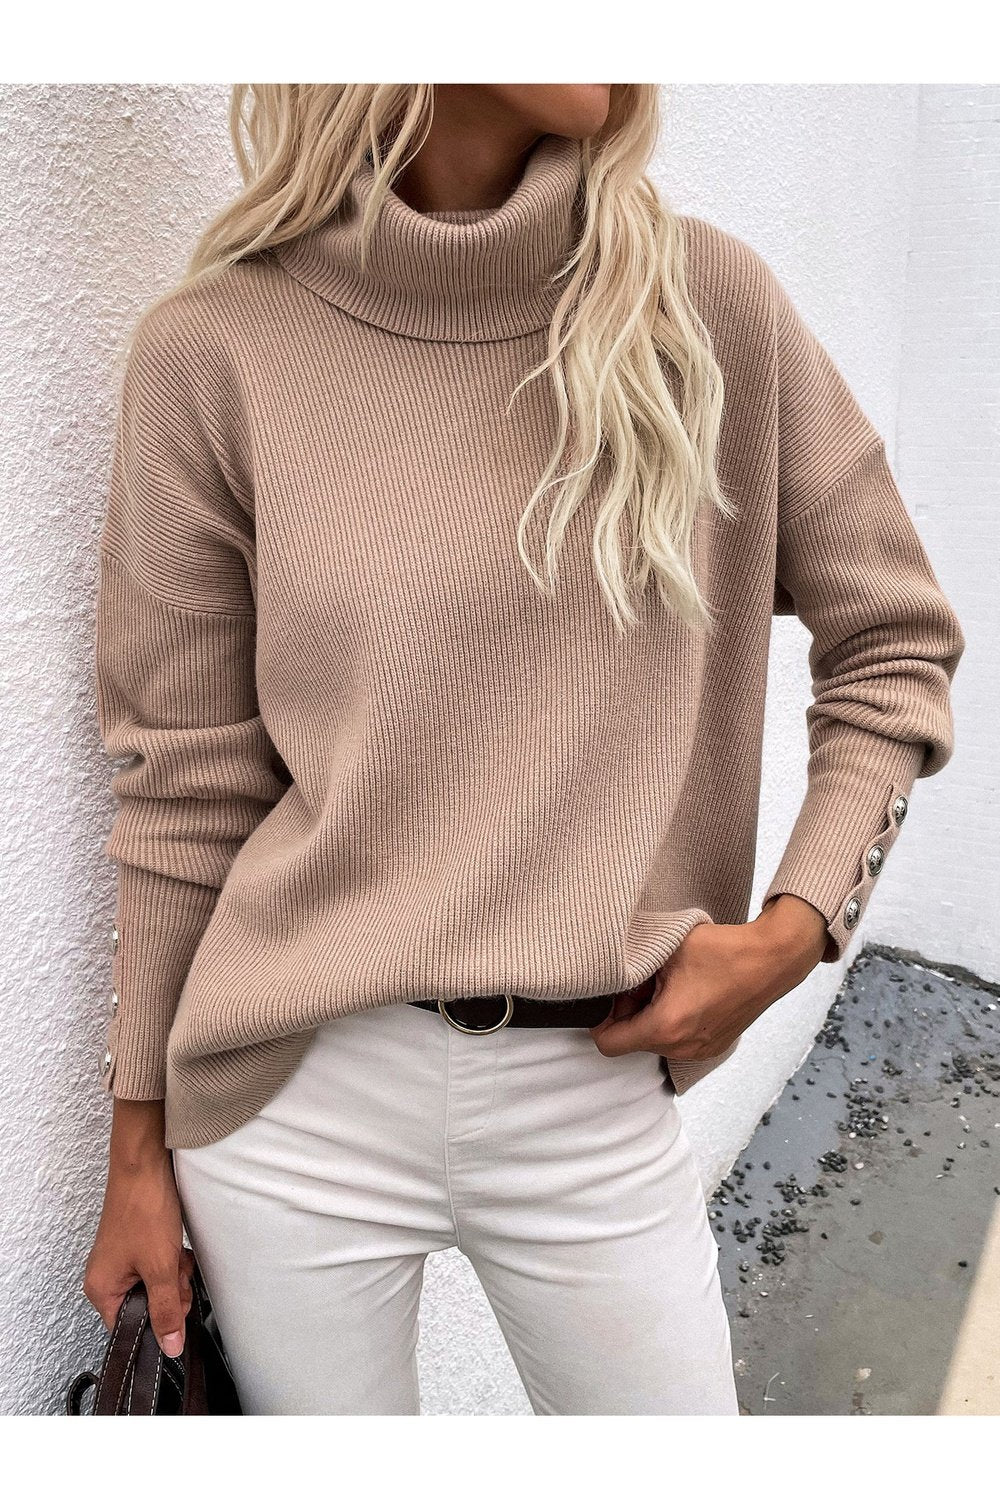 Button Detail Rib-Knit Turtleneck Sweater - Pullover Sweaters - FITGGINS